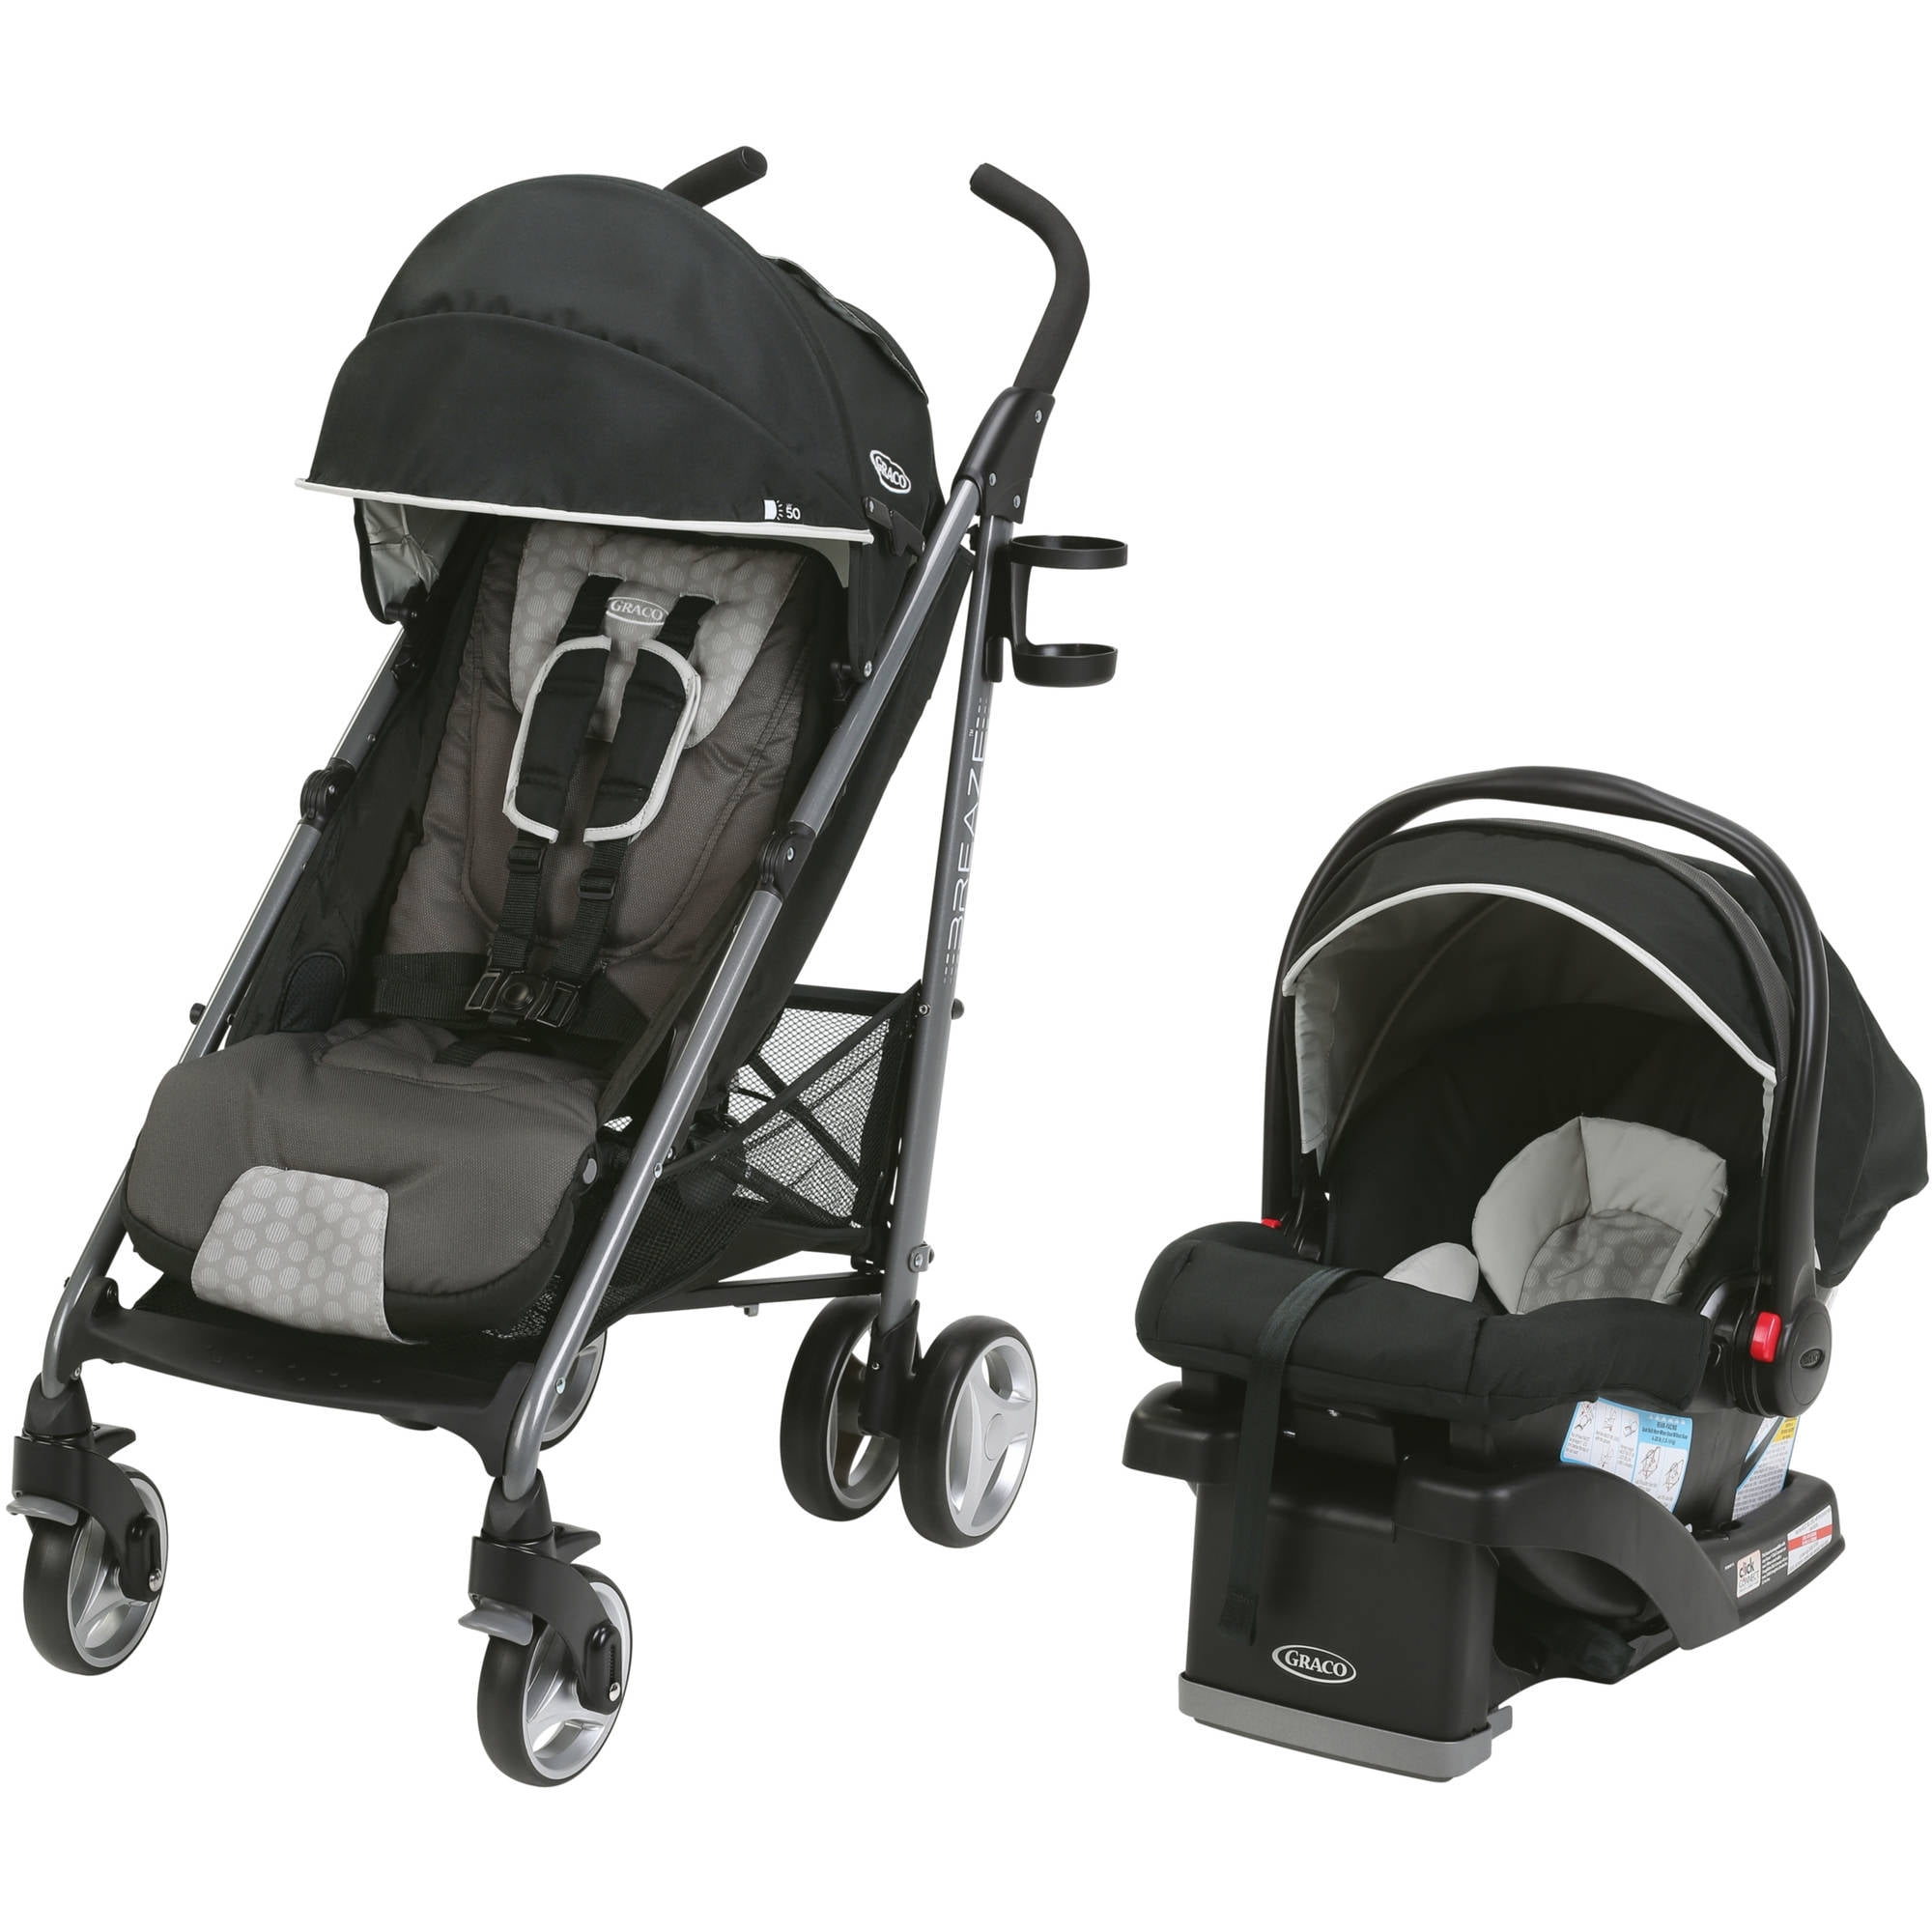 Graco Breaze Travel System Stroller with SnugRide Click Connect 35